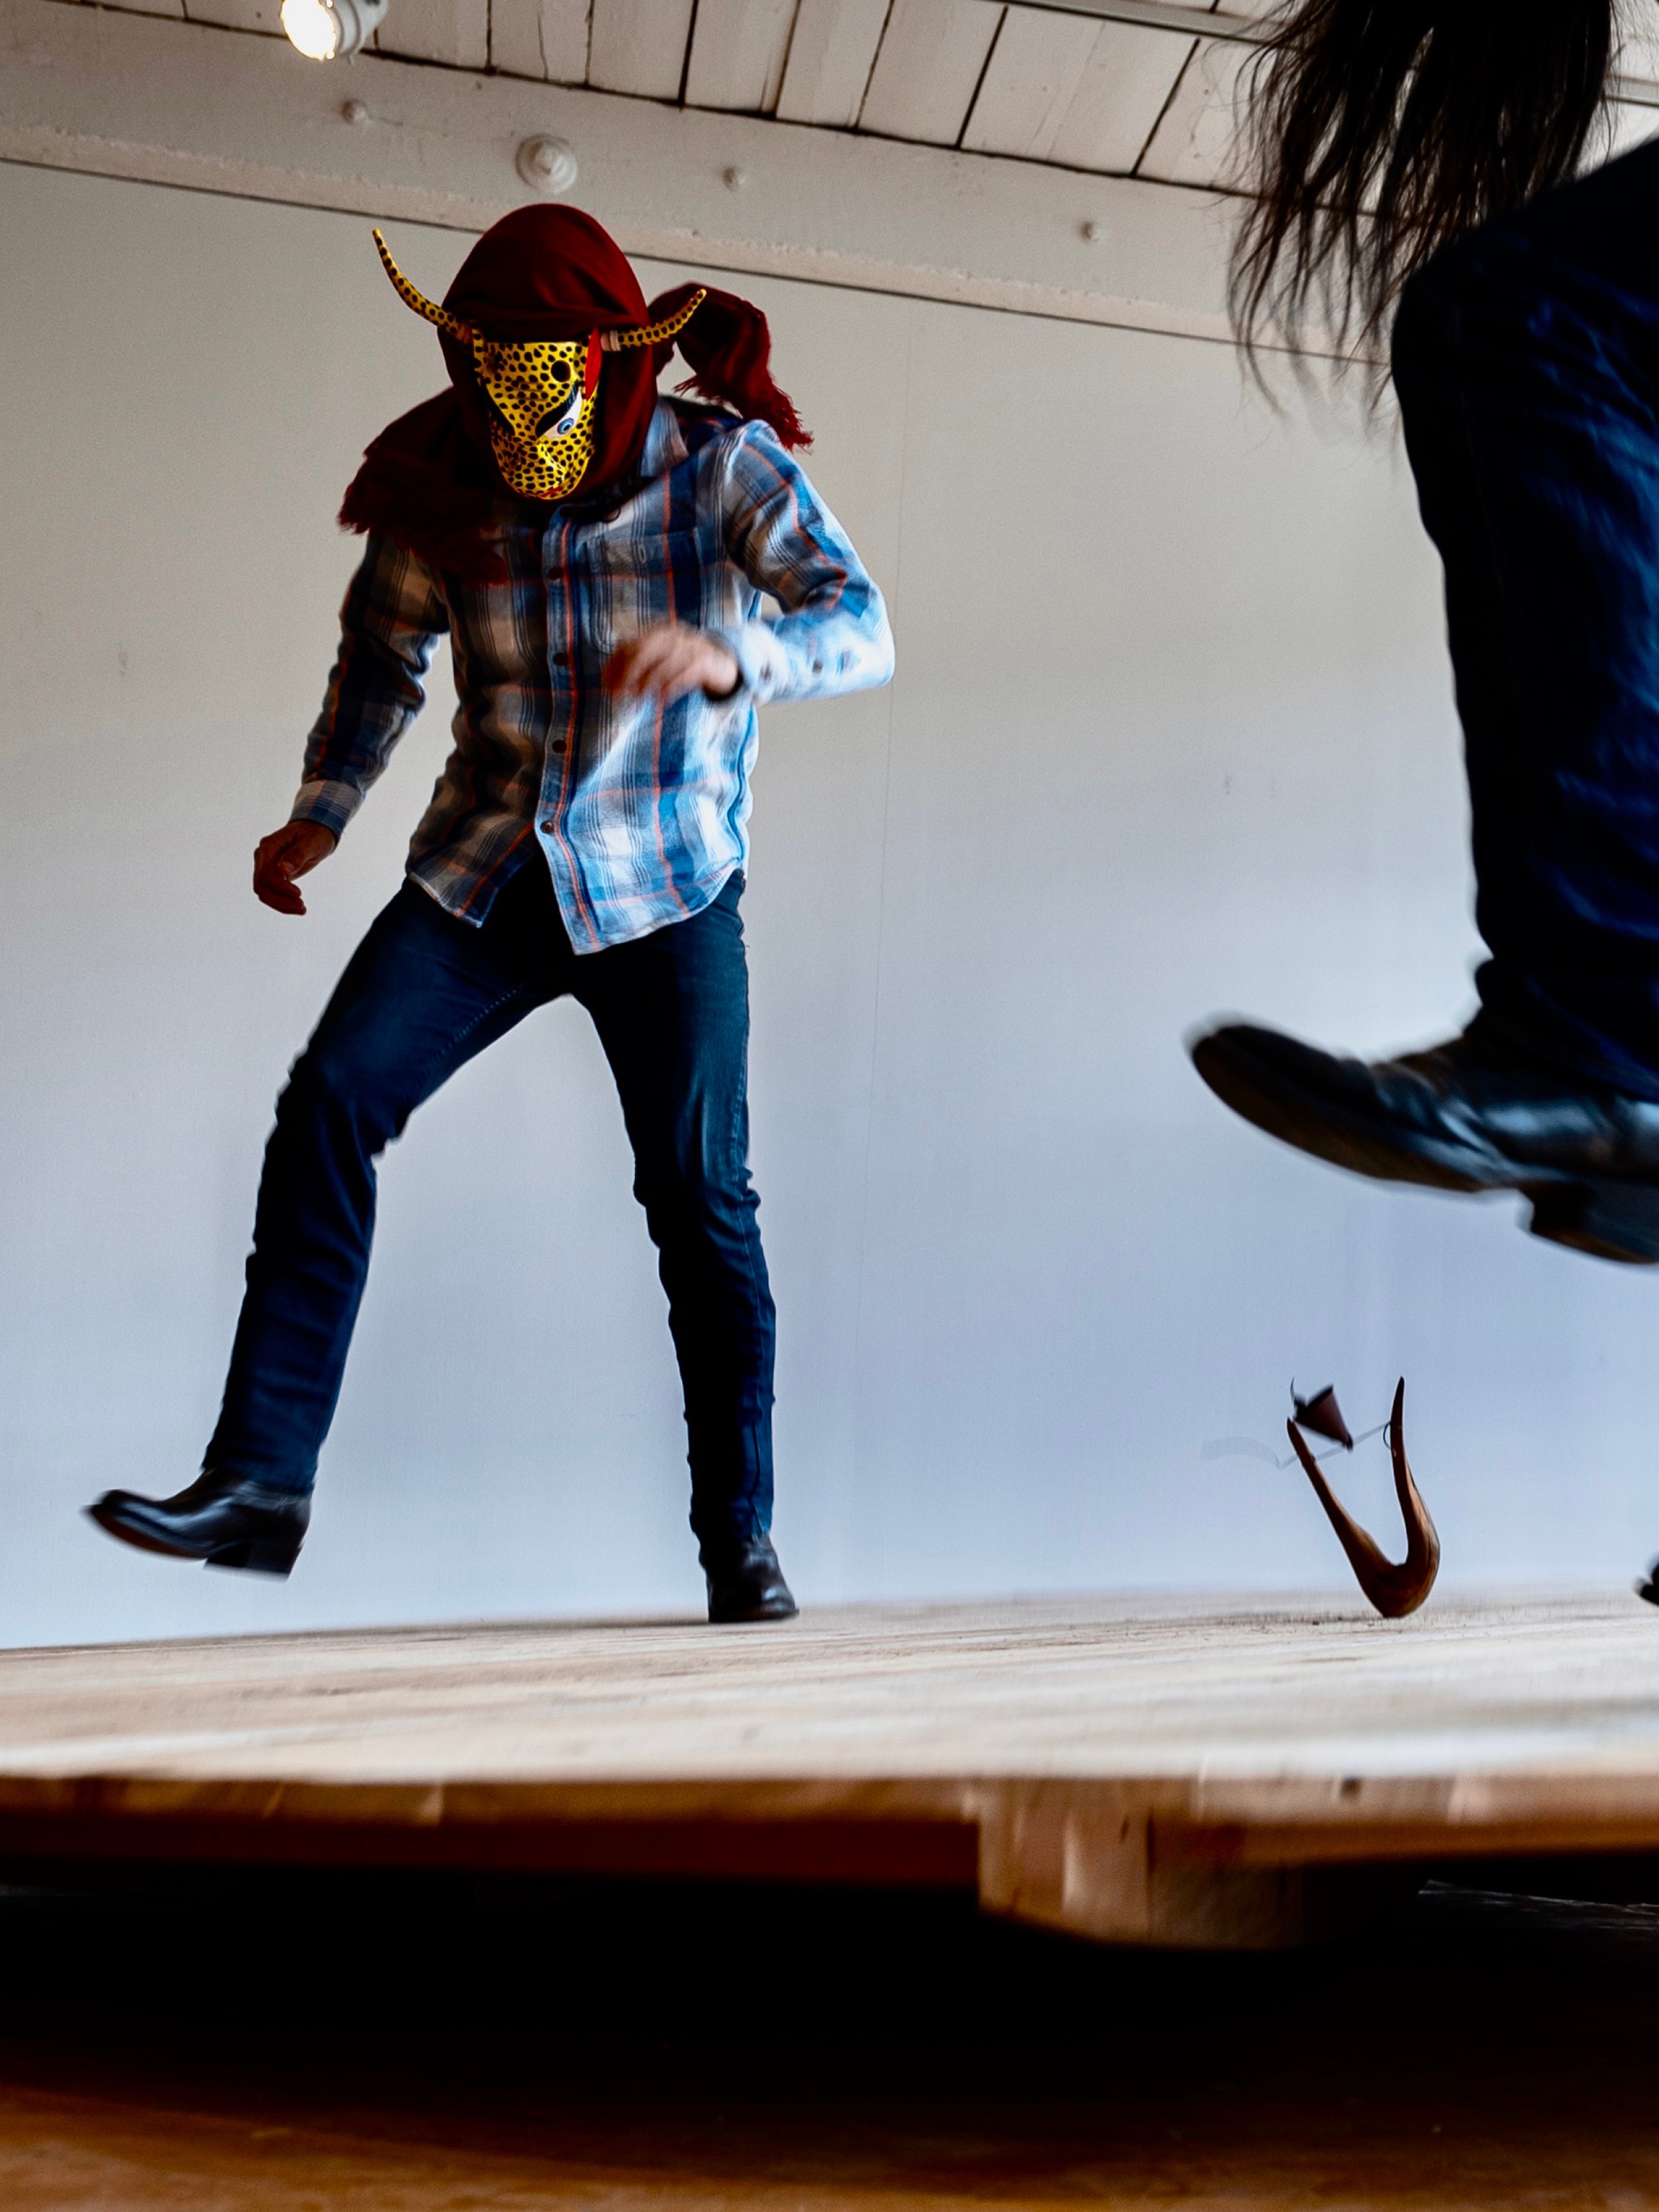 Two performers stand in a nondescript room on a wooden platform. They are both seen from an angle slightly below, one of them is cut off by the frame of the image so we see only legs and long hair hanging down from where the performer bends over. The other performer is seen in full, wearing jeans and boots, a blue plaid shirt, and a head covering including a ceremonial mask that resembles a jaguar’s face with two long, thin horns. Both are suspended in air slightly above the ground, stomping.